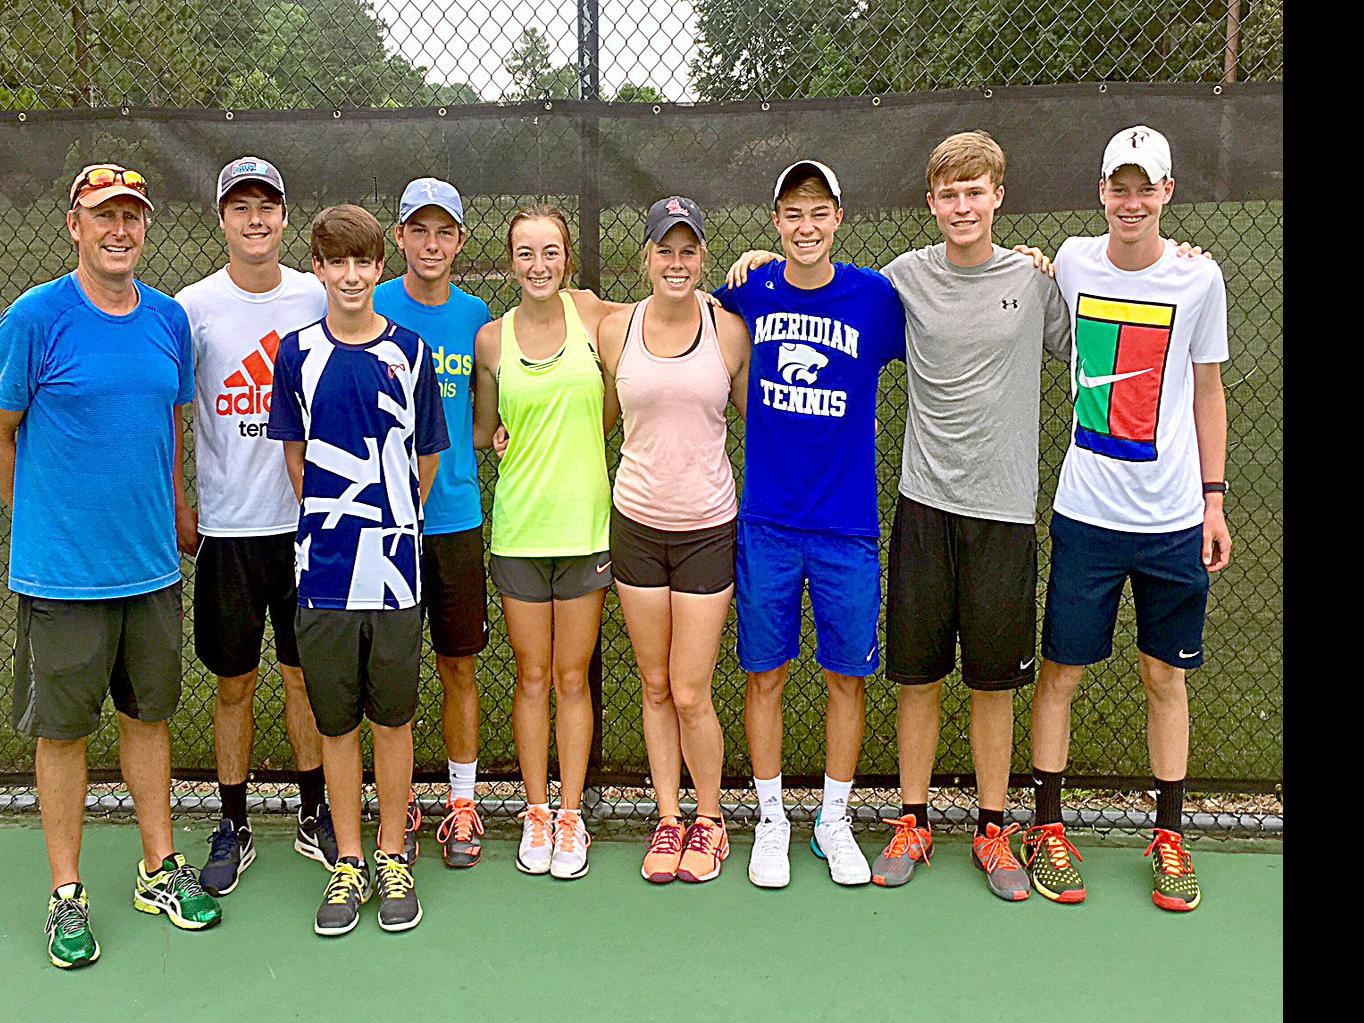 Local players dominate at qualifier, Sports